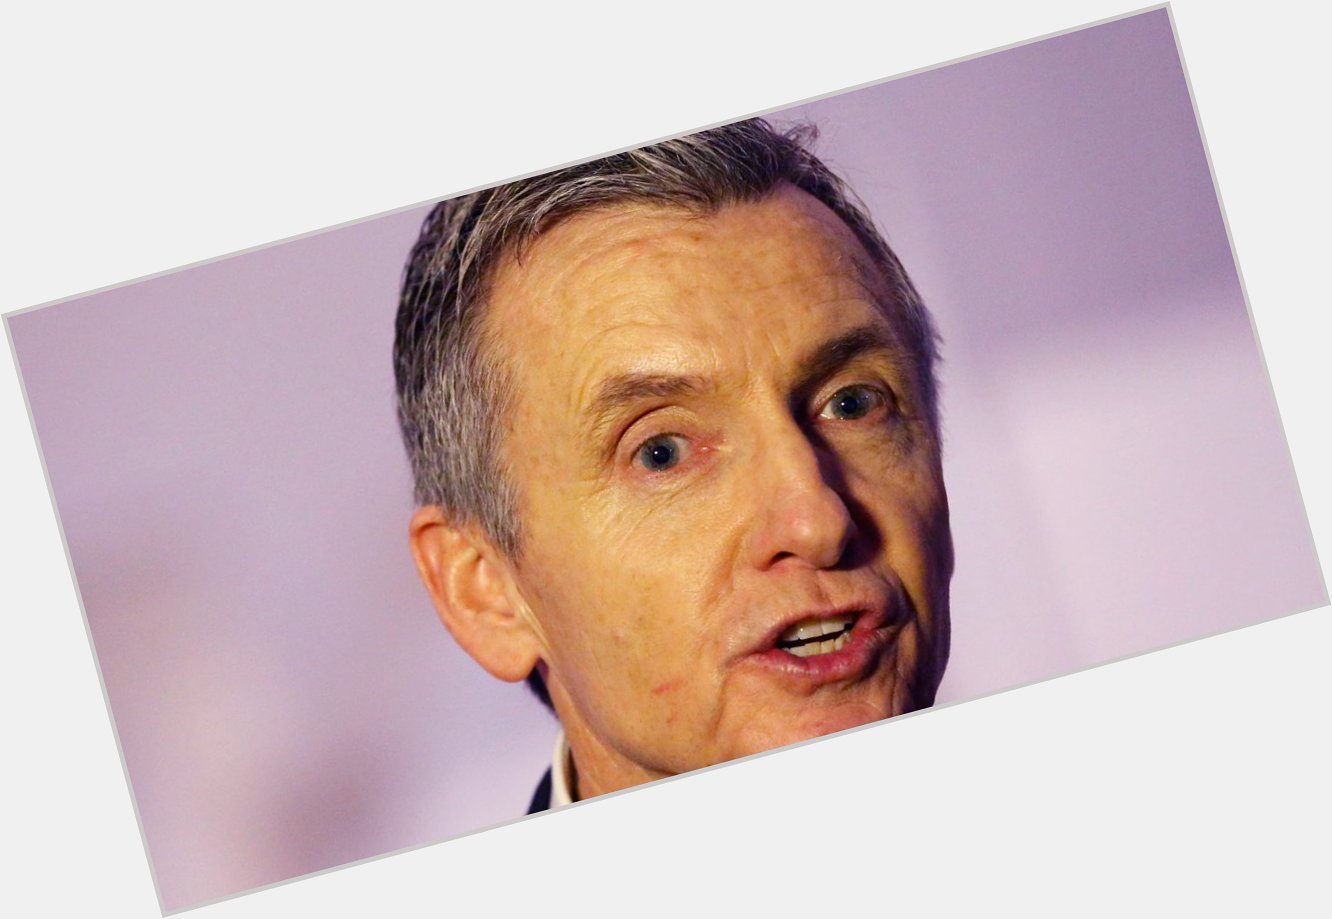 SPECIAL!

On this day in 1953, an icon of Australian broadcasting was born.

Happy birthday, Bruce McAvaney. 